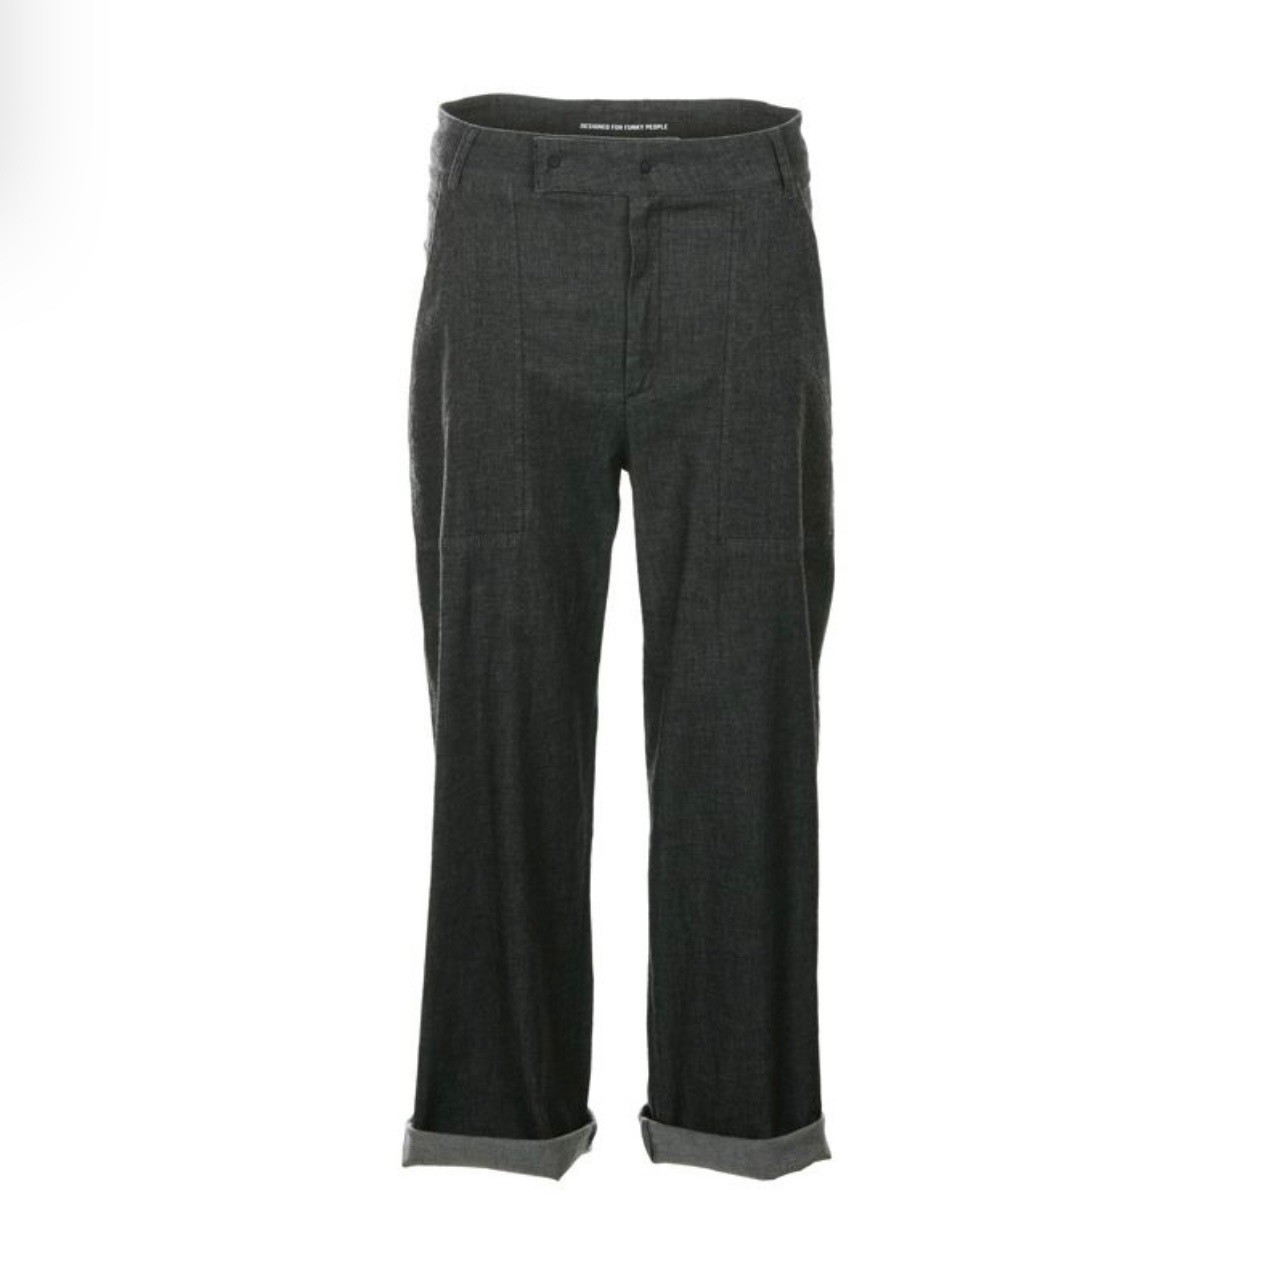 Quirkee Birds - Funky Staff Charcoal Wide Leg Pant